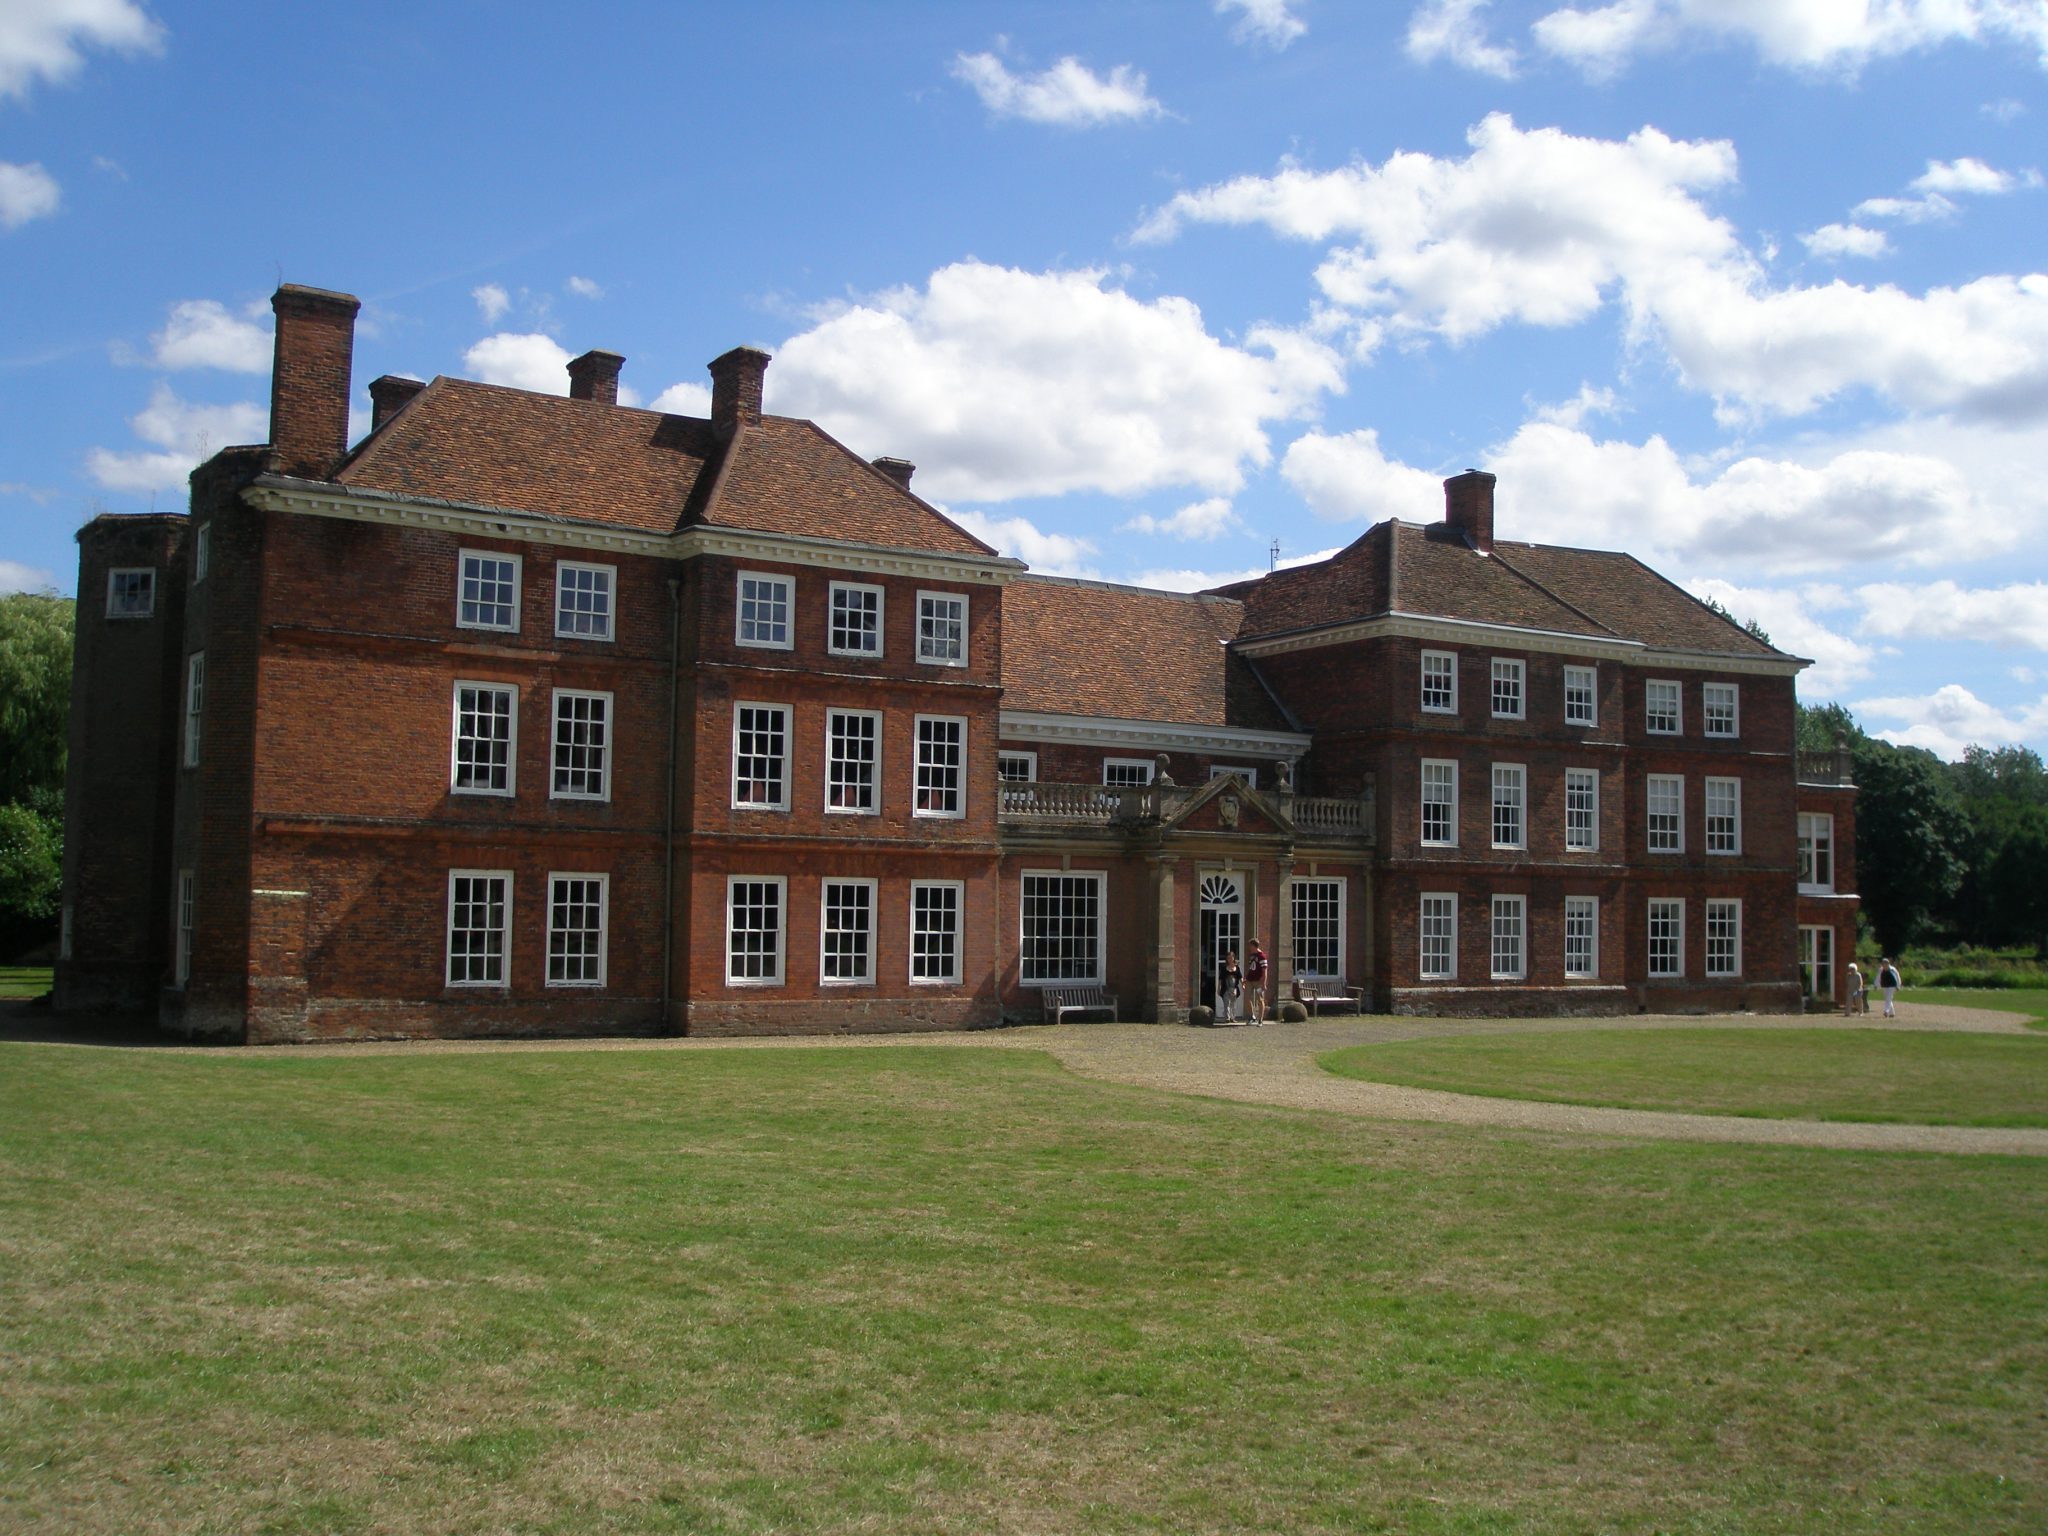 The West Front of Lullingstone Castle is opposite the Gate House. The facade, done in the Queen Anne style, was added in the mid 18th century. The Manor House was originally surrounded by a moat.